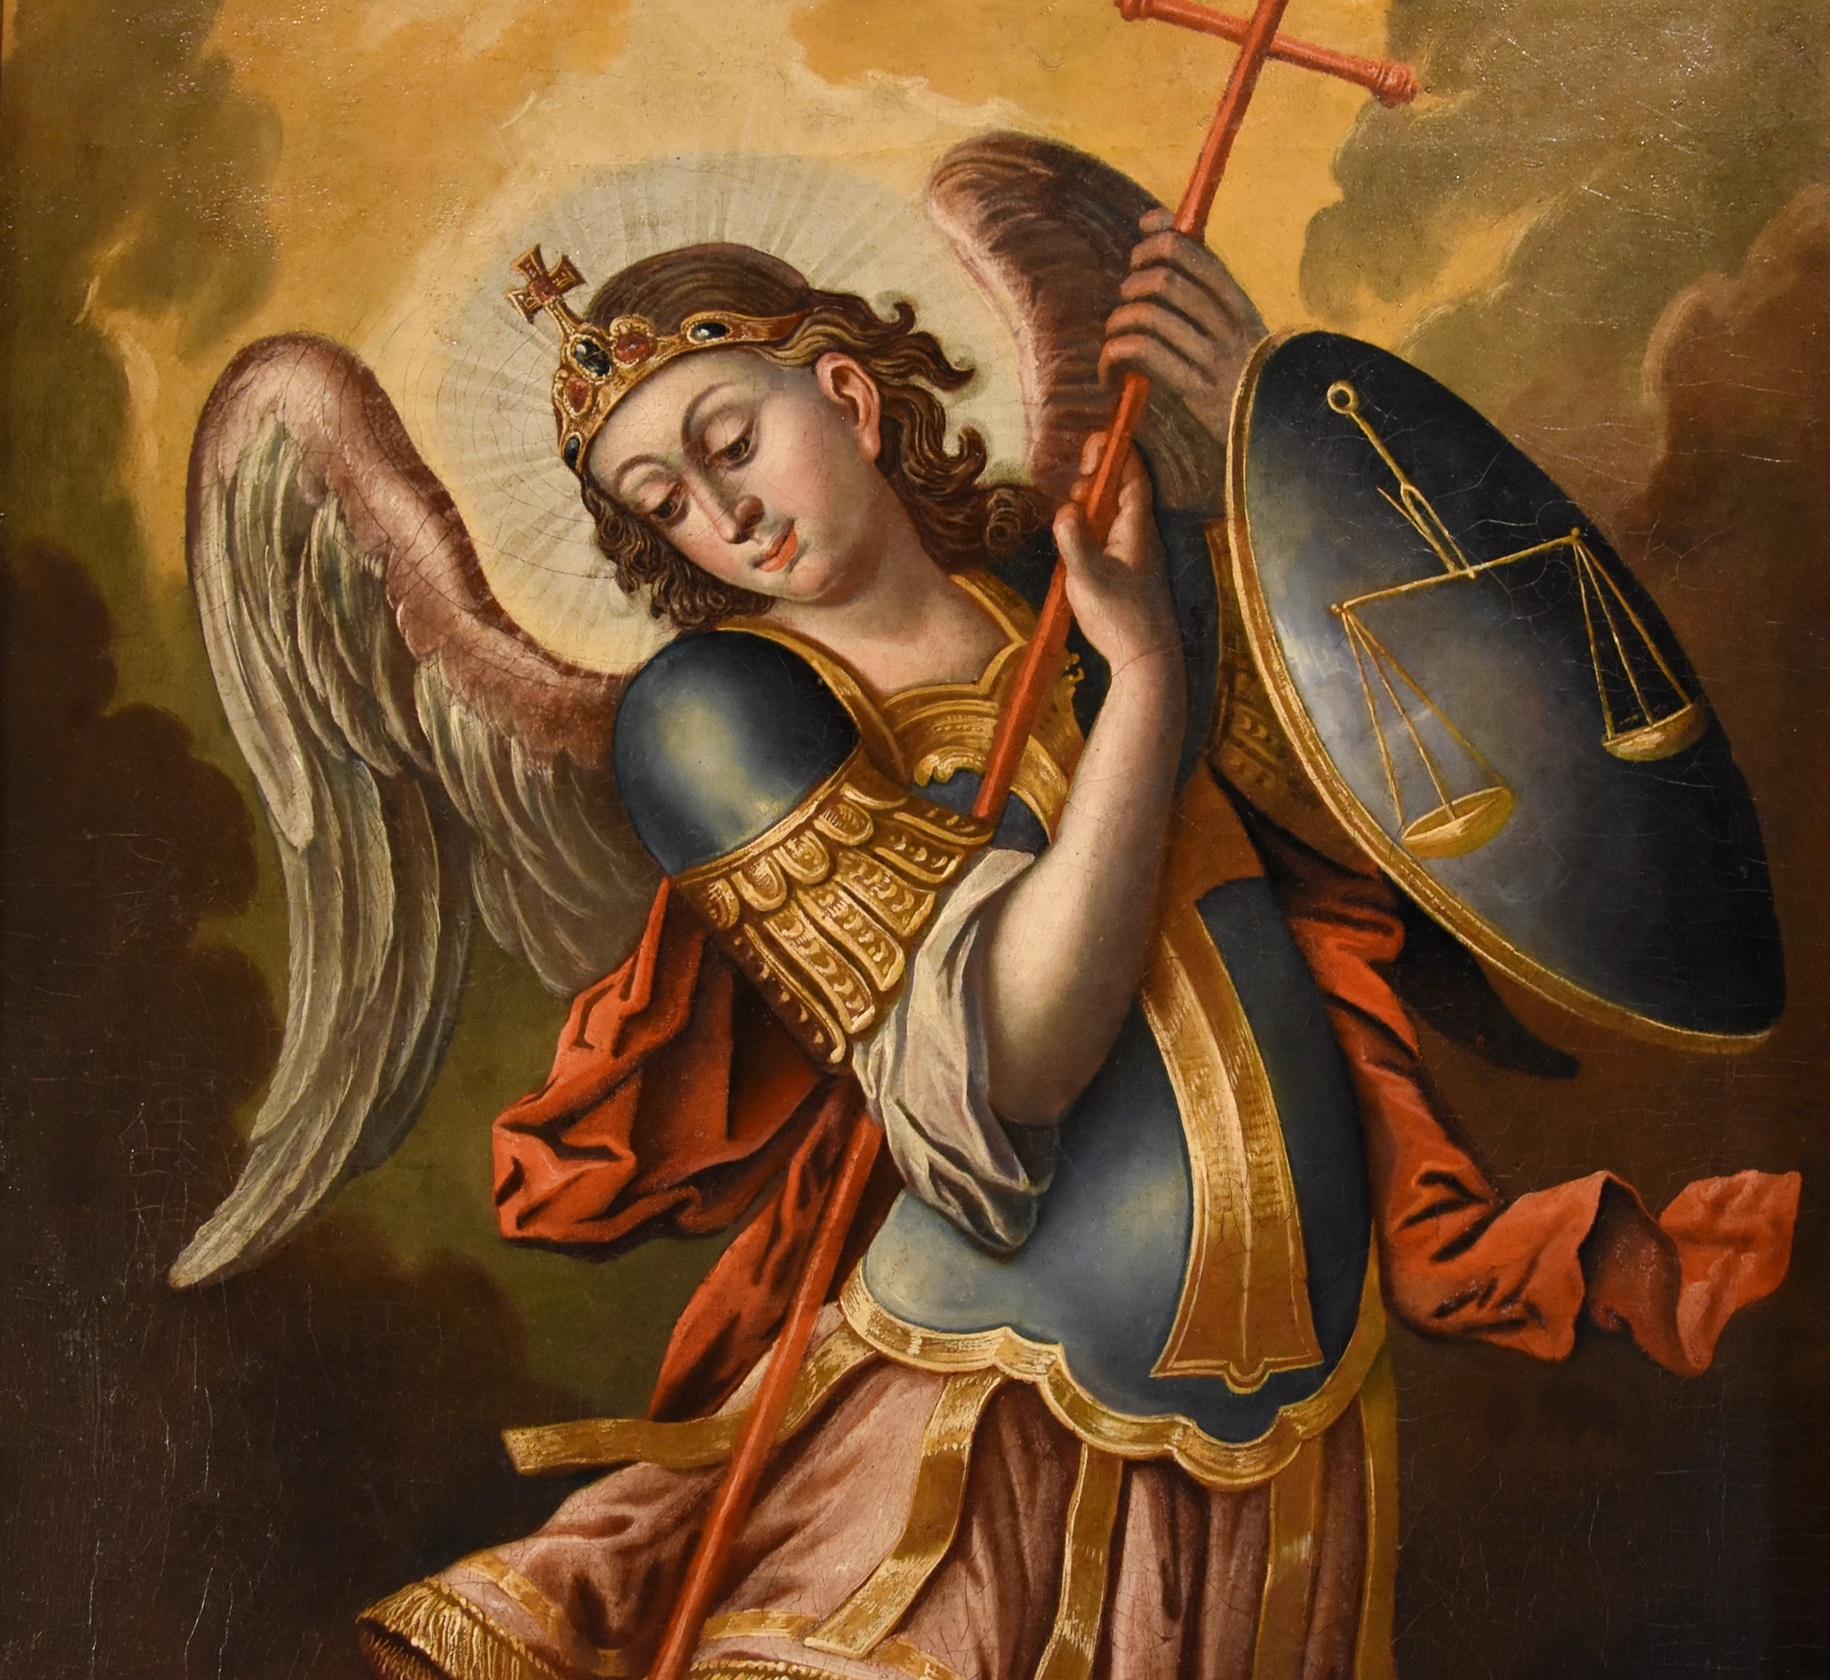 Spanish school of the mid-17th century
Saint Michael Archangel

Oil on canvas (144 x 80 - Framed 159 x 95 cm)

LINK (click here)

The canvas shows a splendid St. Michael the Archangel subduing the devil. Distinguished by a particularly solemn and